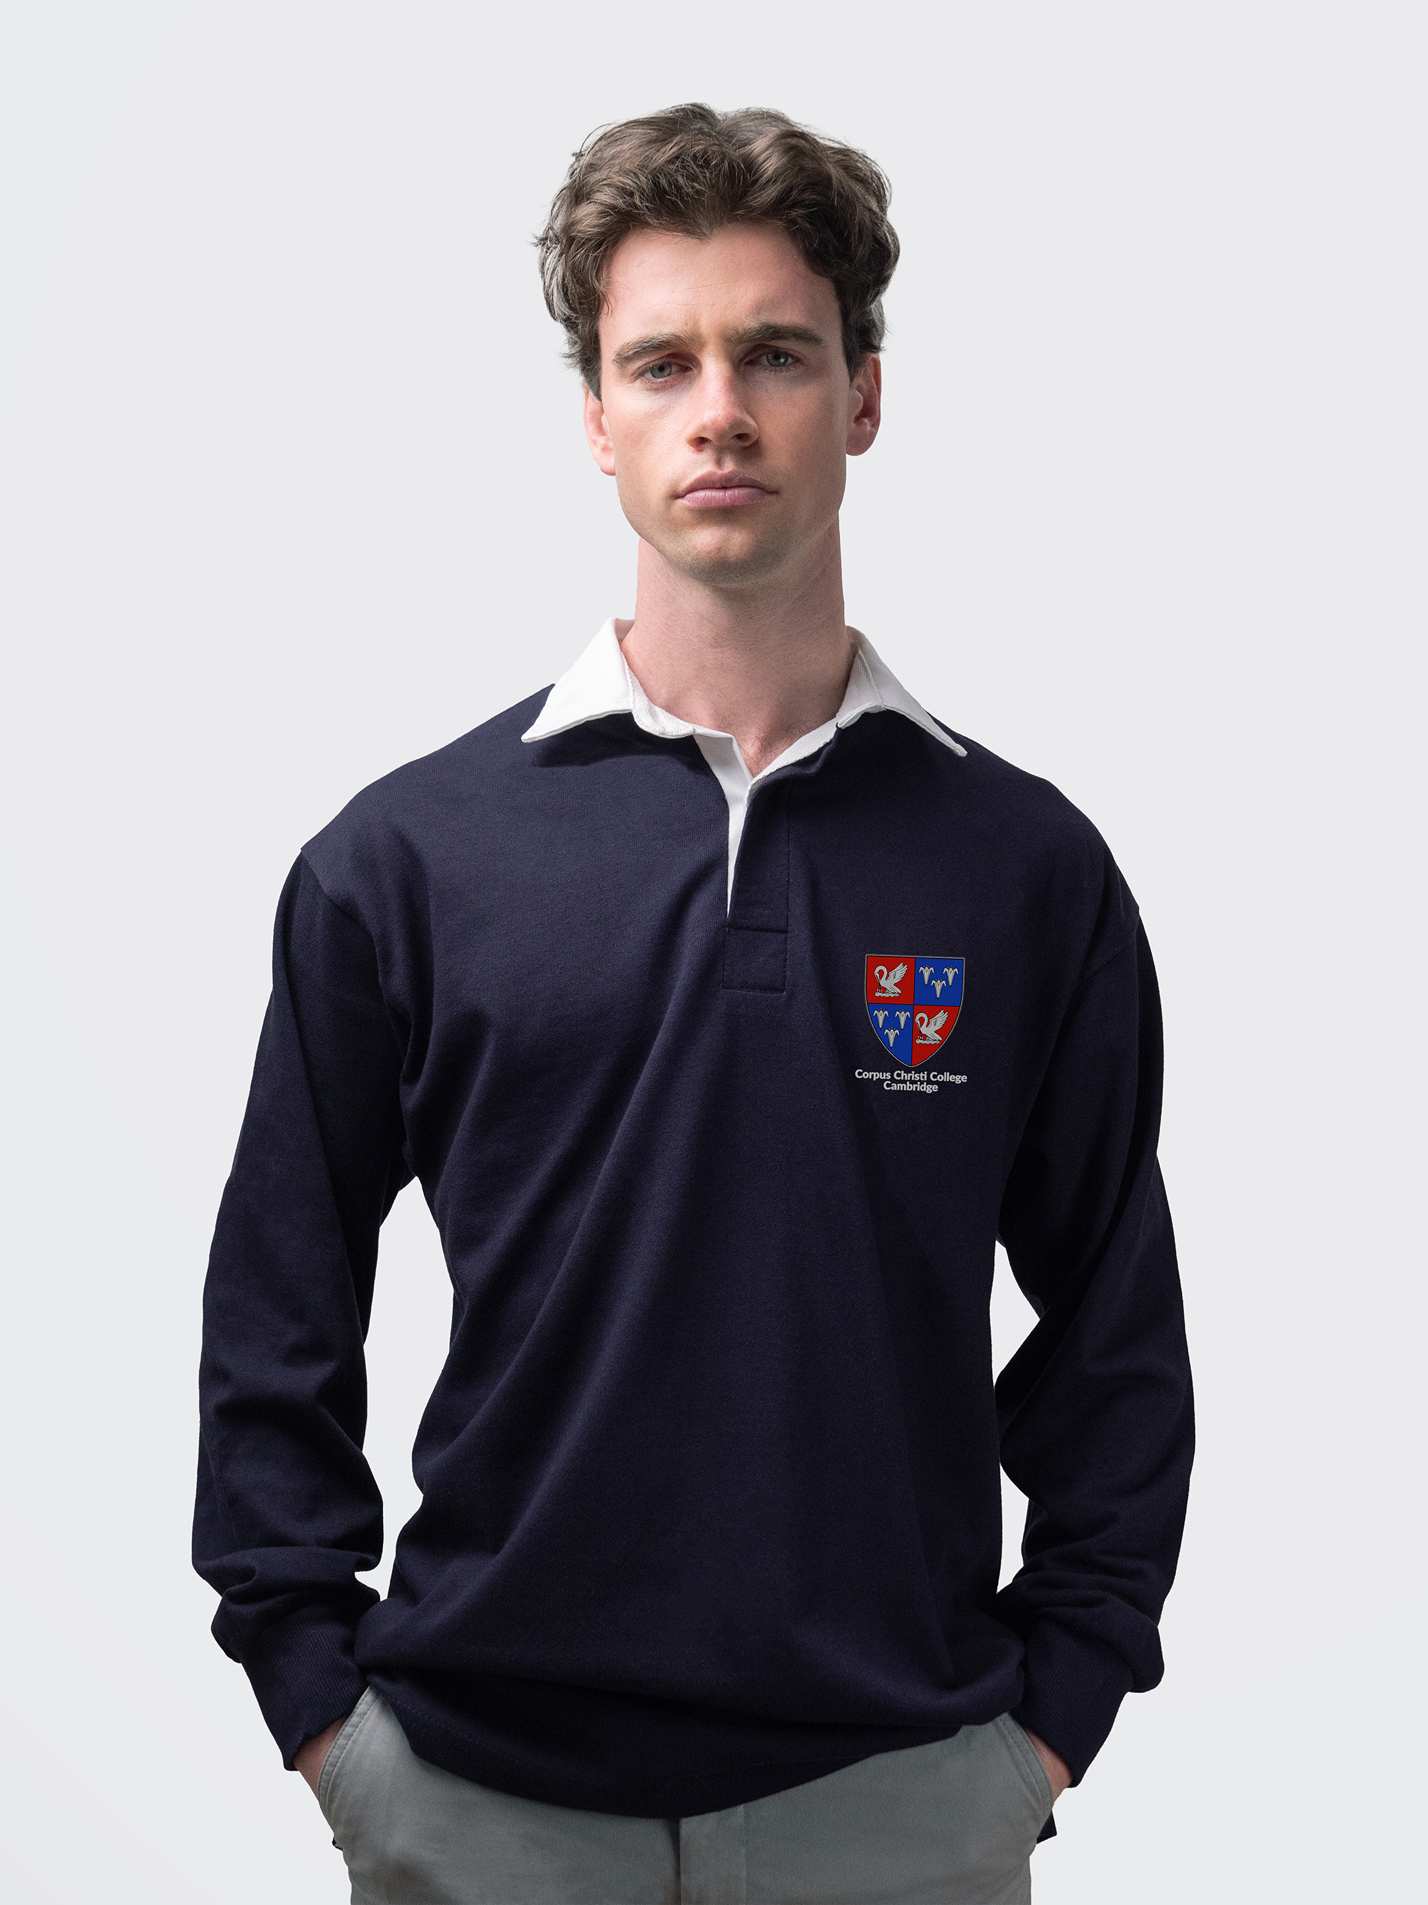 Corpus Christi student wearing an embroidered mens rugby shirt in navy